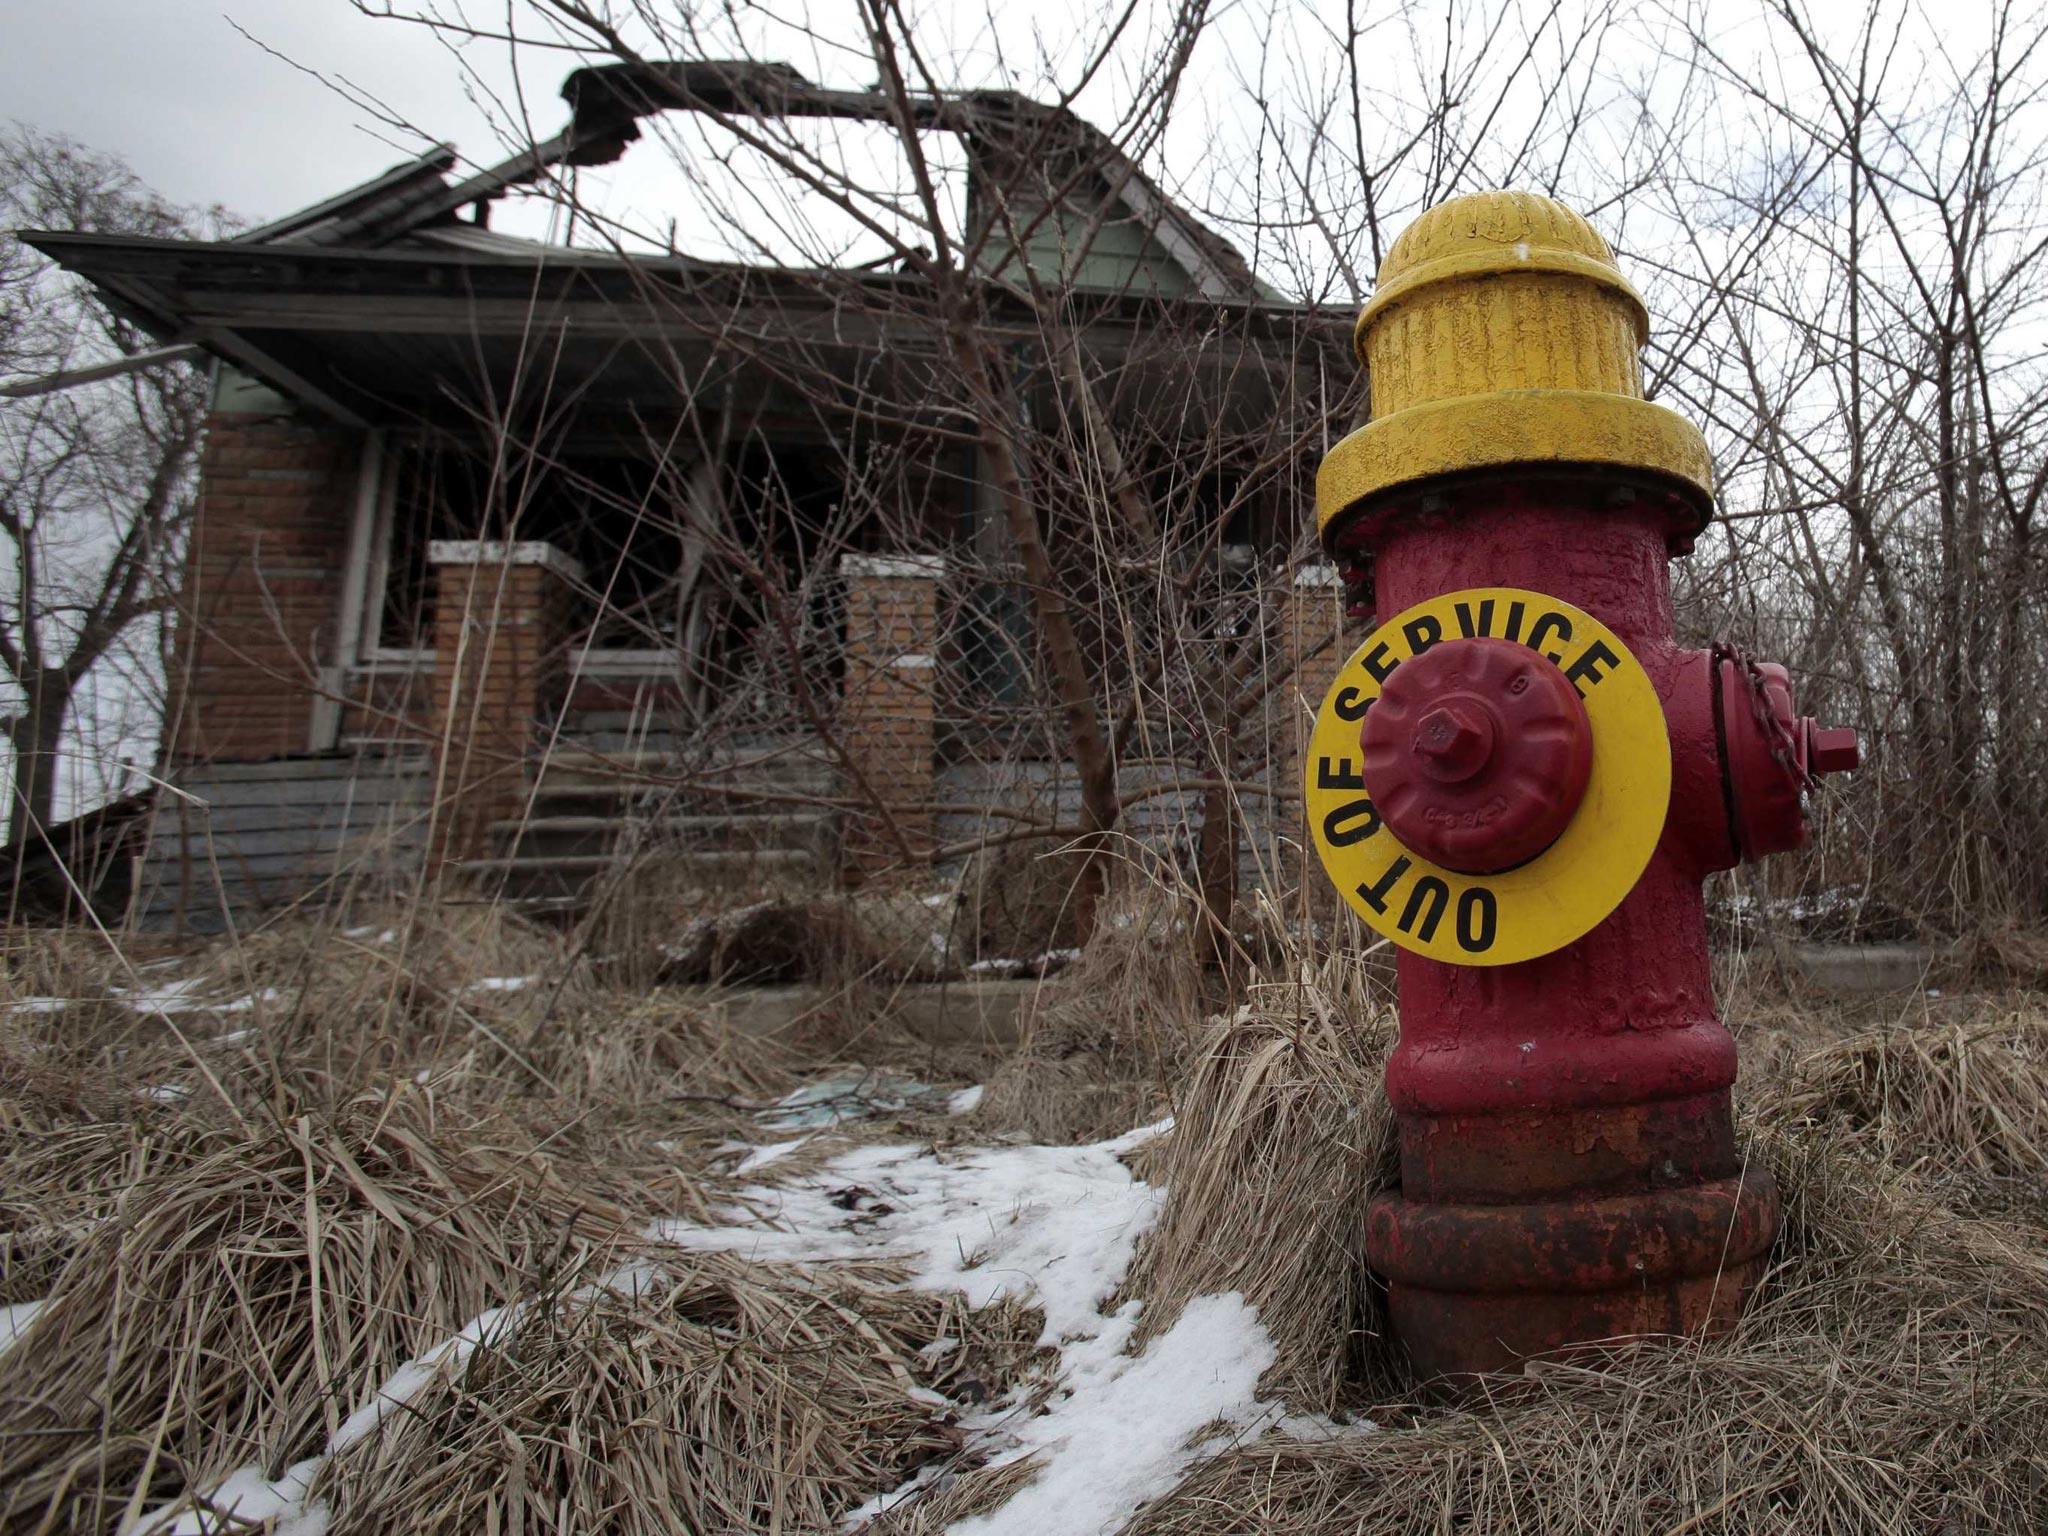 March 2013: A fire hydrant is seen with an "Out of Service" sign on a blighted street on the east side of Detroit, Michigan